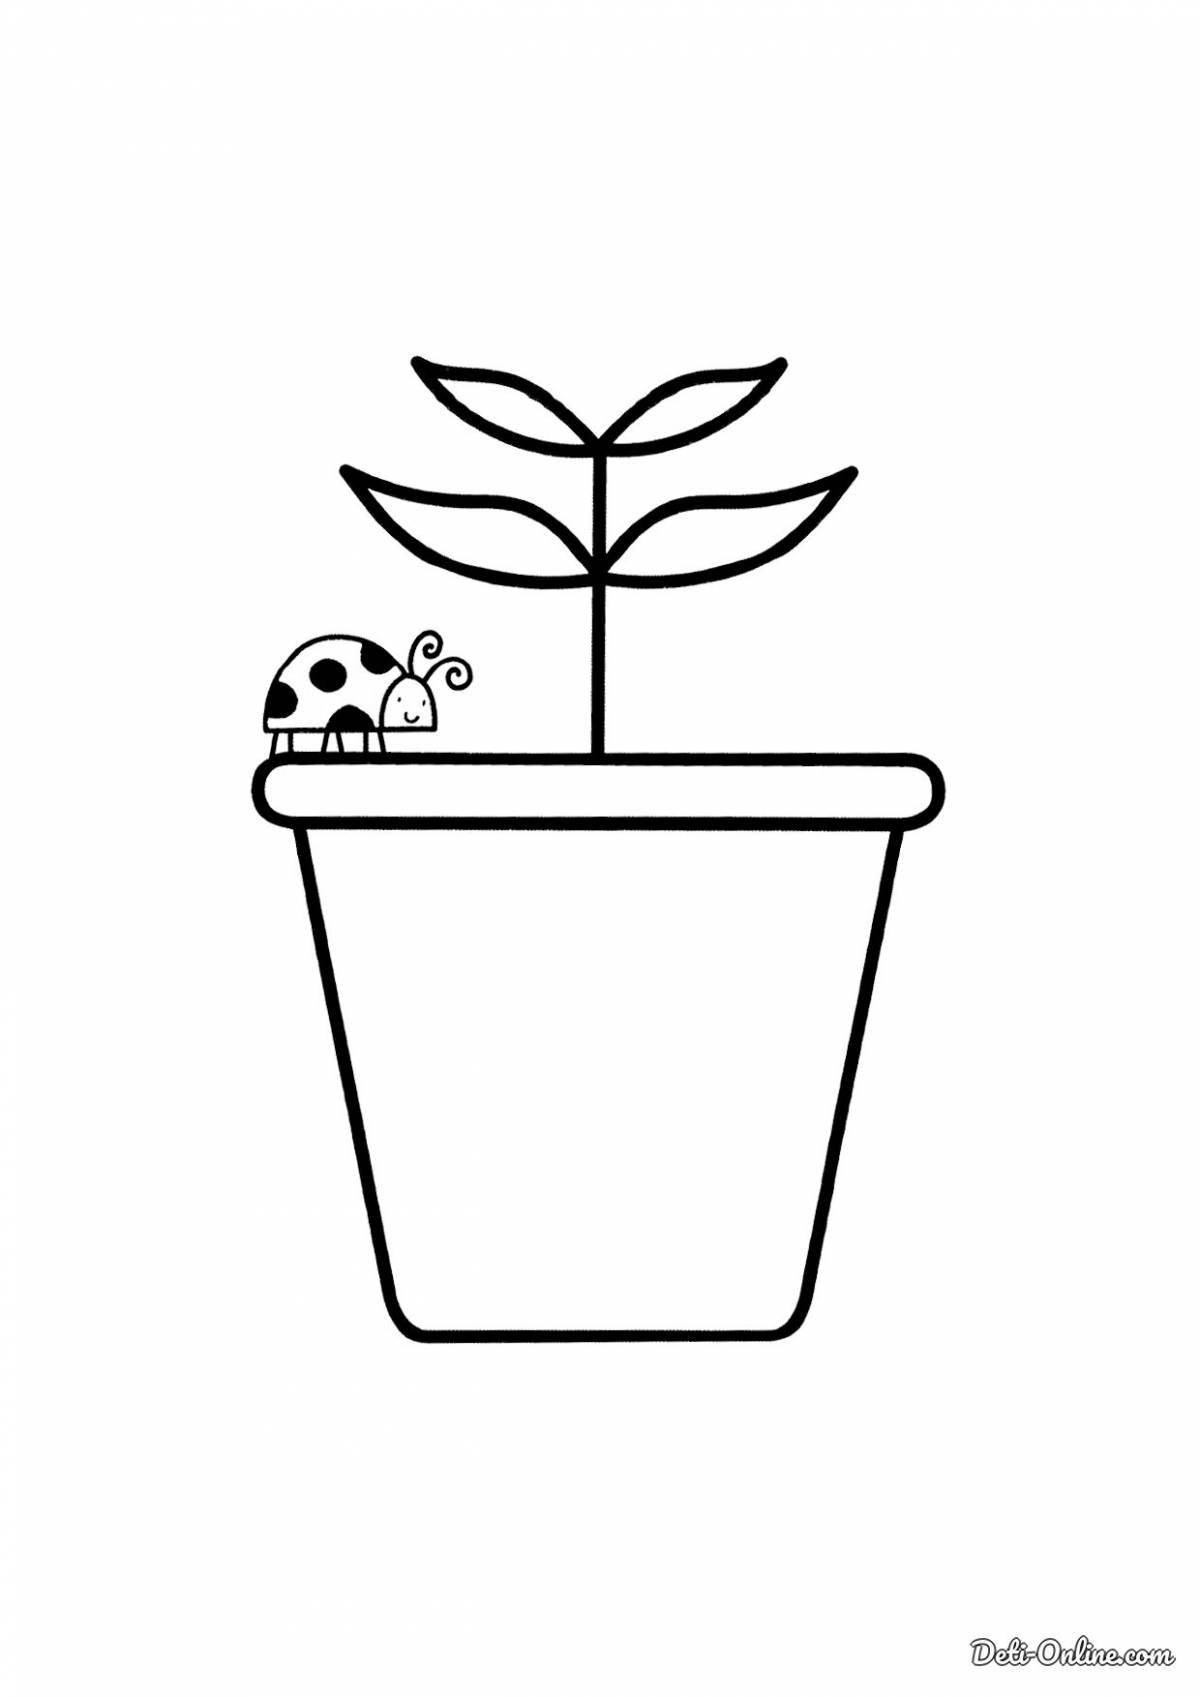 Playful flower pot coloring page